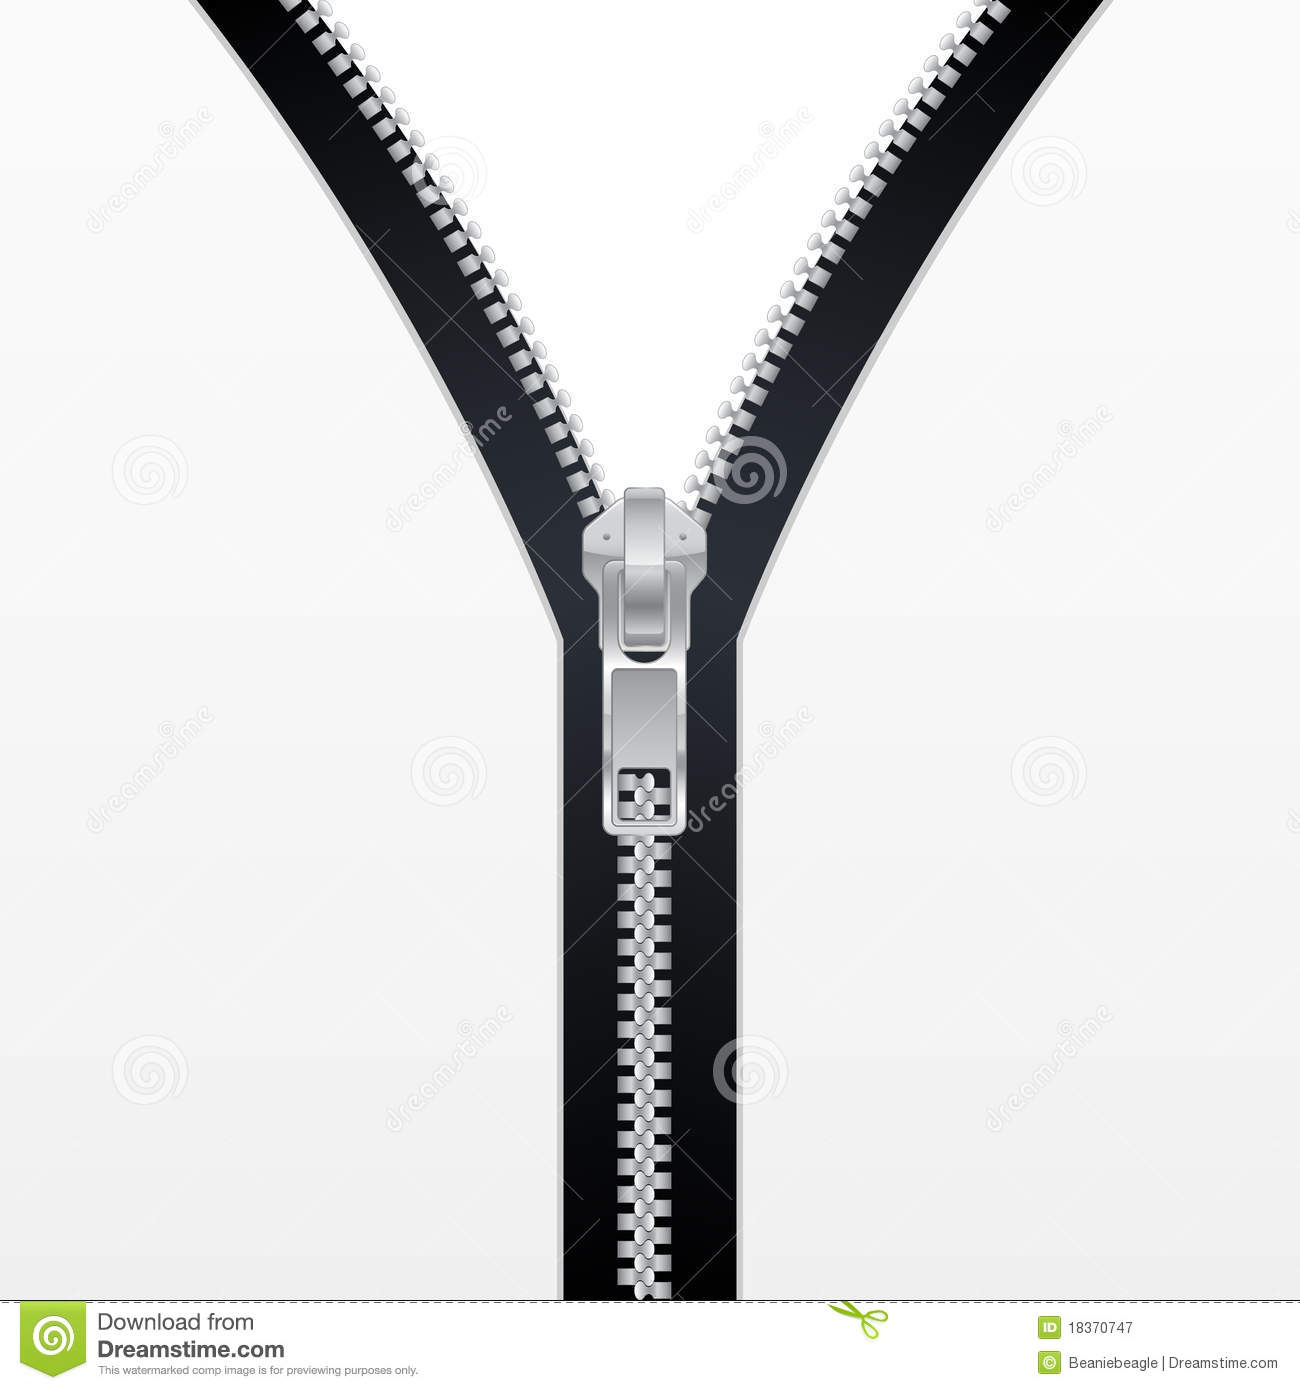 An Illustration Of A Black Zipper With Blank Area For Adding A